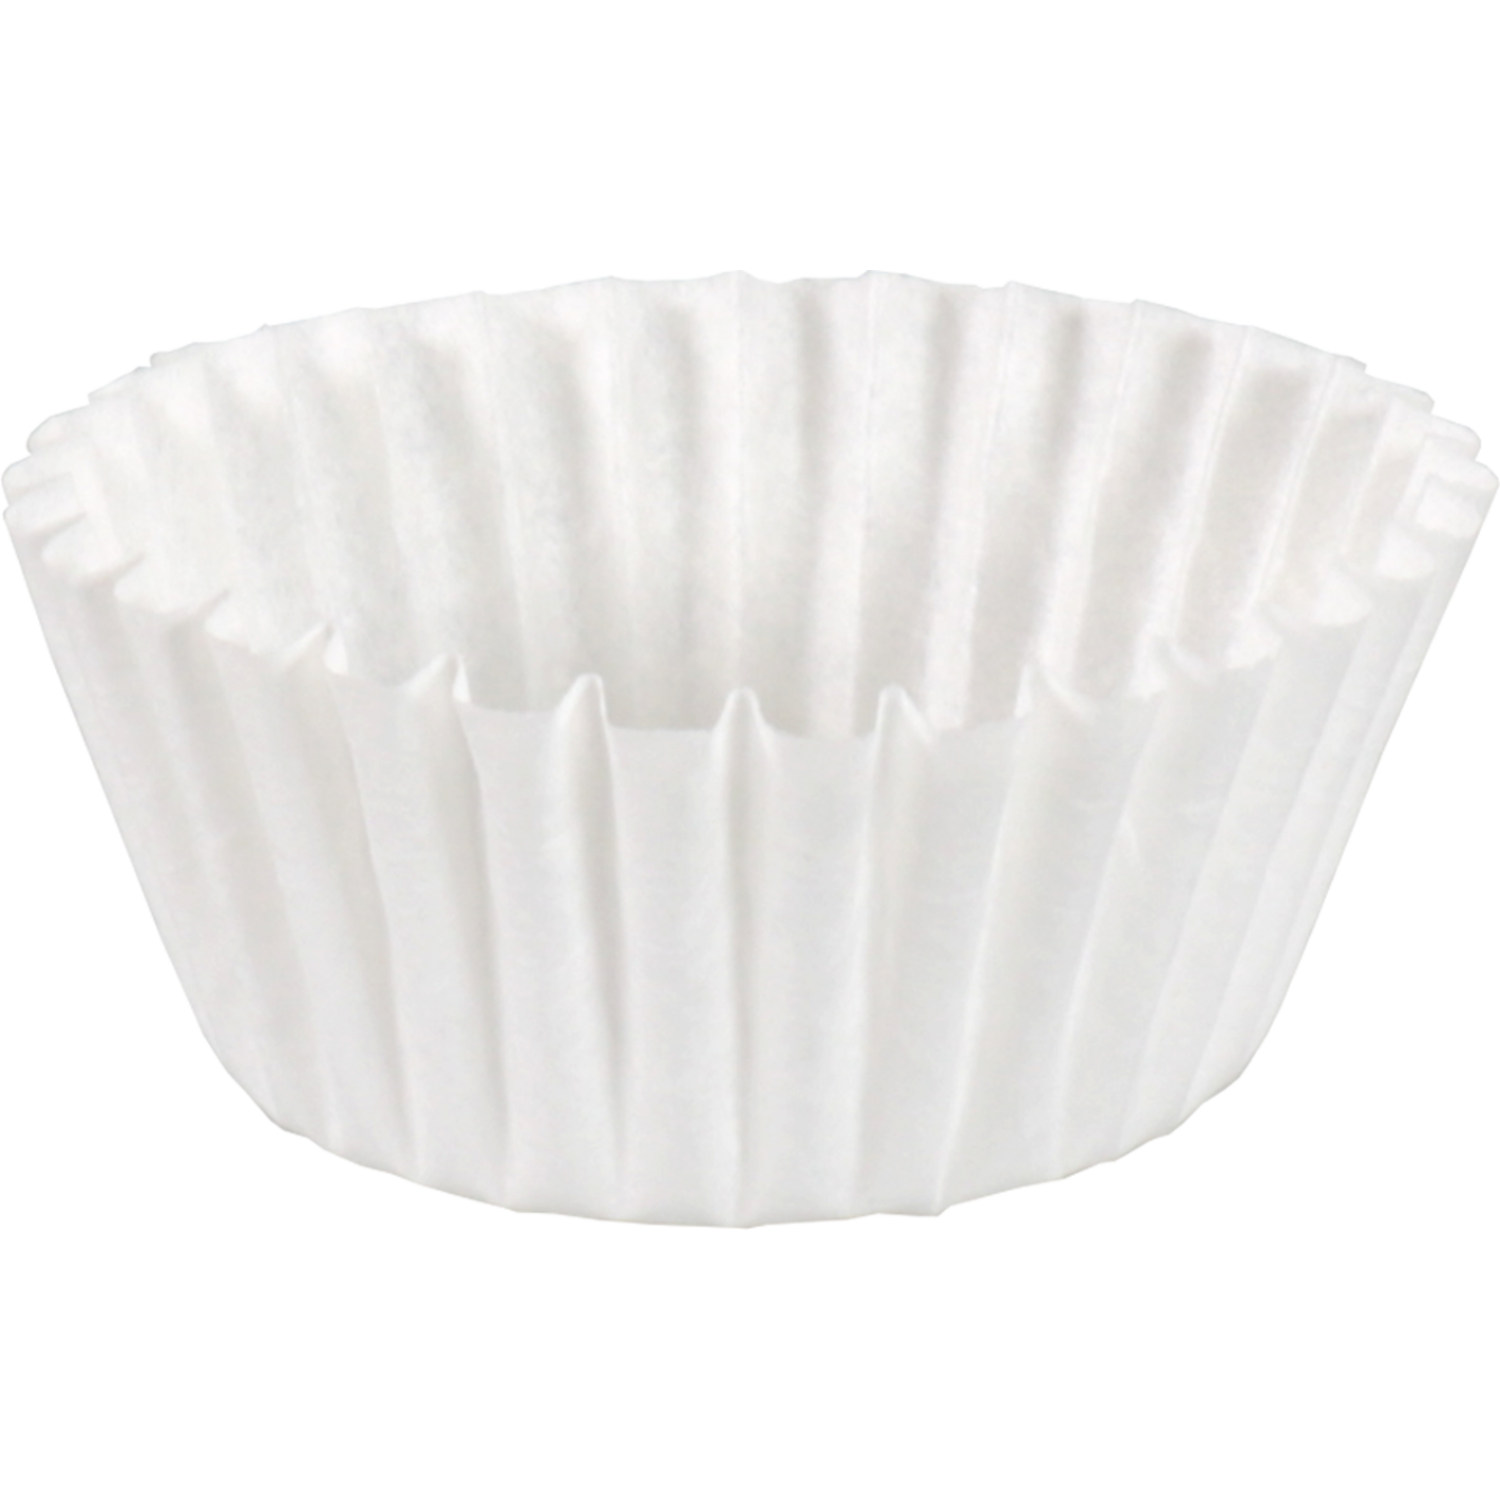 Cupcake case , paper + clay coating , round, Ø88mm, white 1